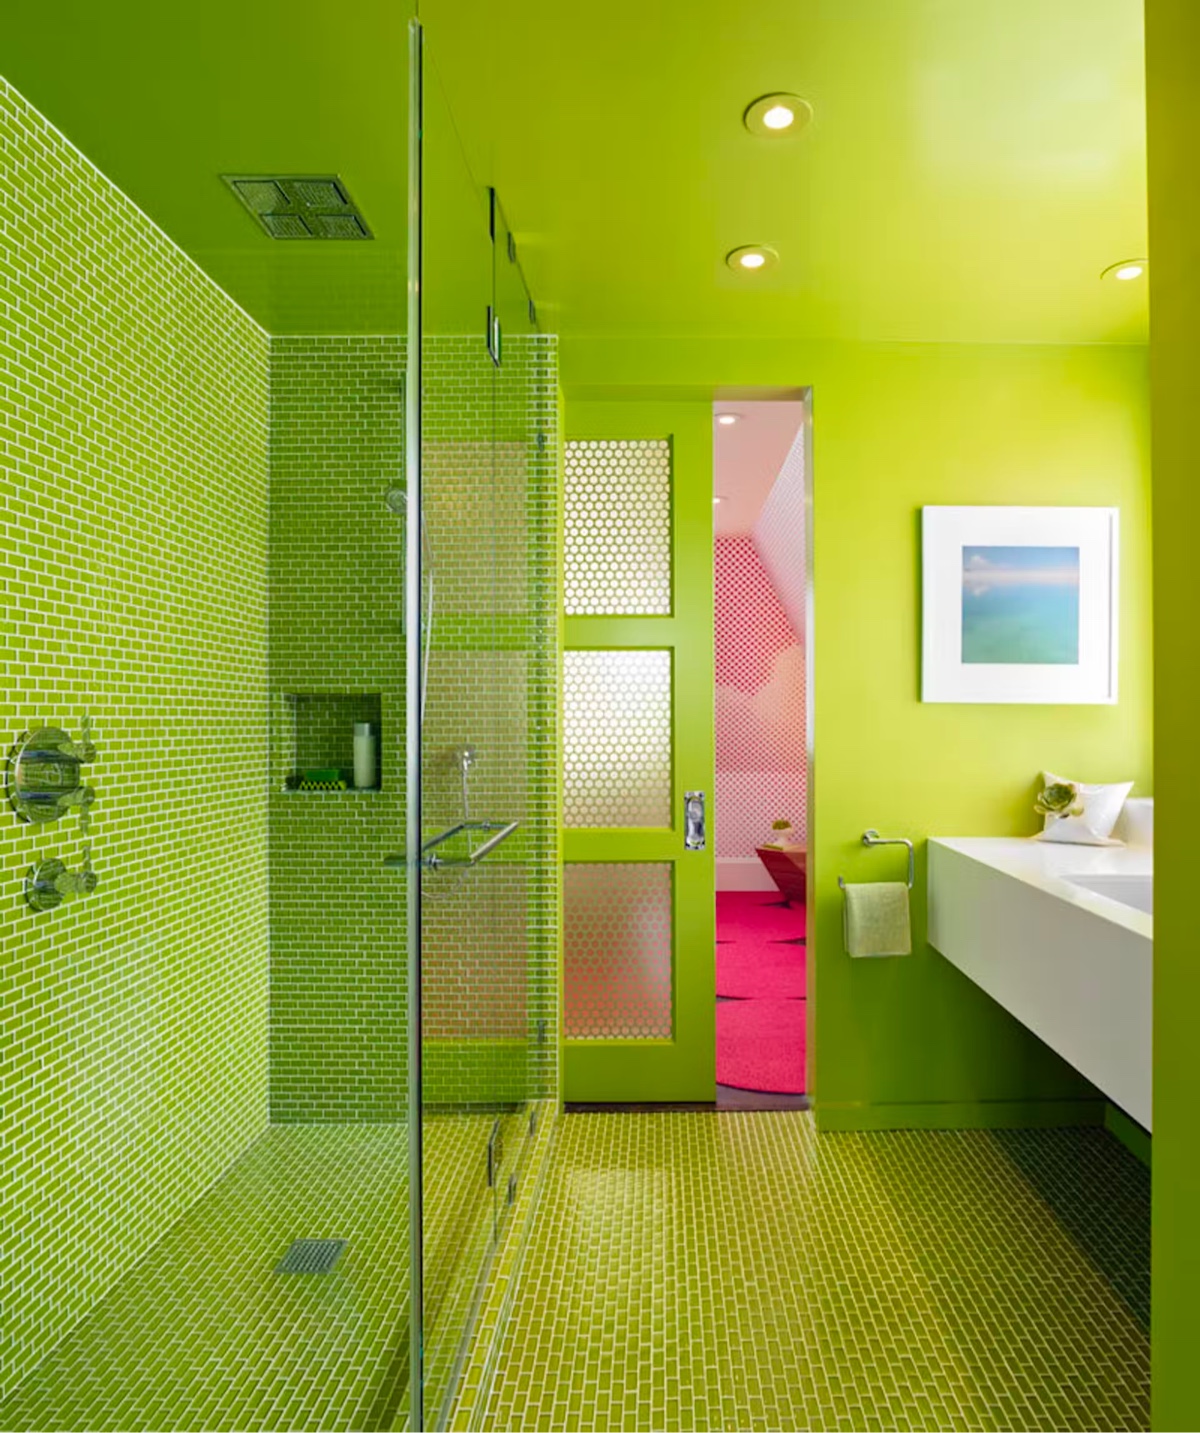 Neon green décor schemes are not for the shy and reserved homeowner but pack a powerful punch.